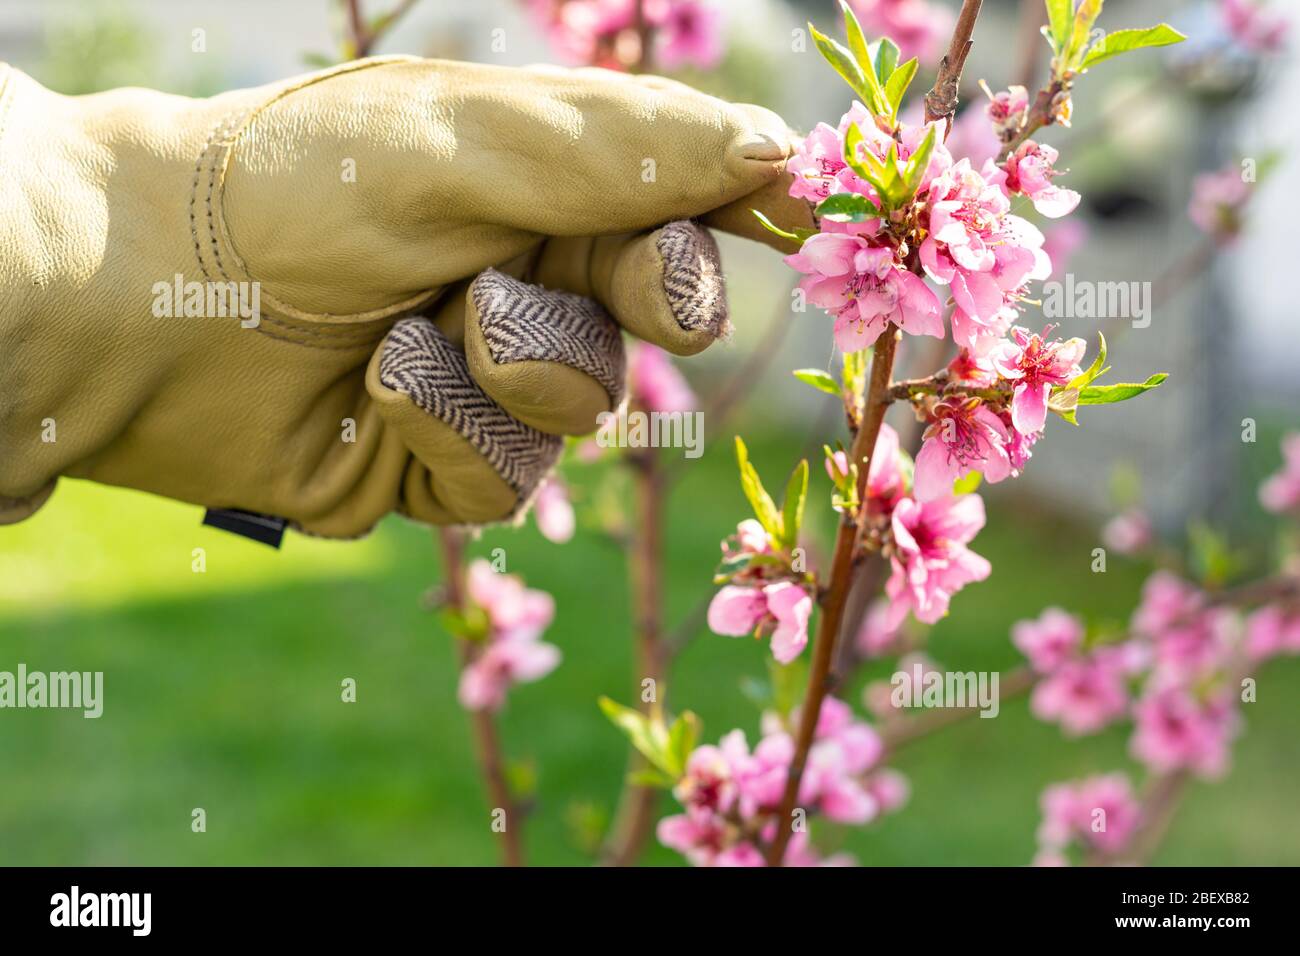 Hand in gardening glove checks the blossoms on a peach tree Stock Photo